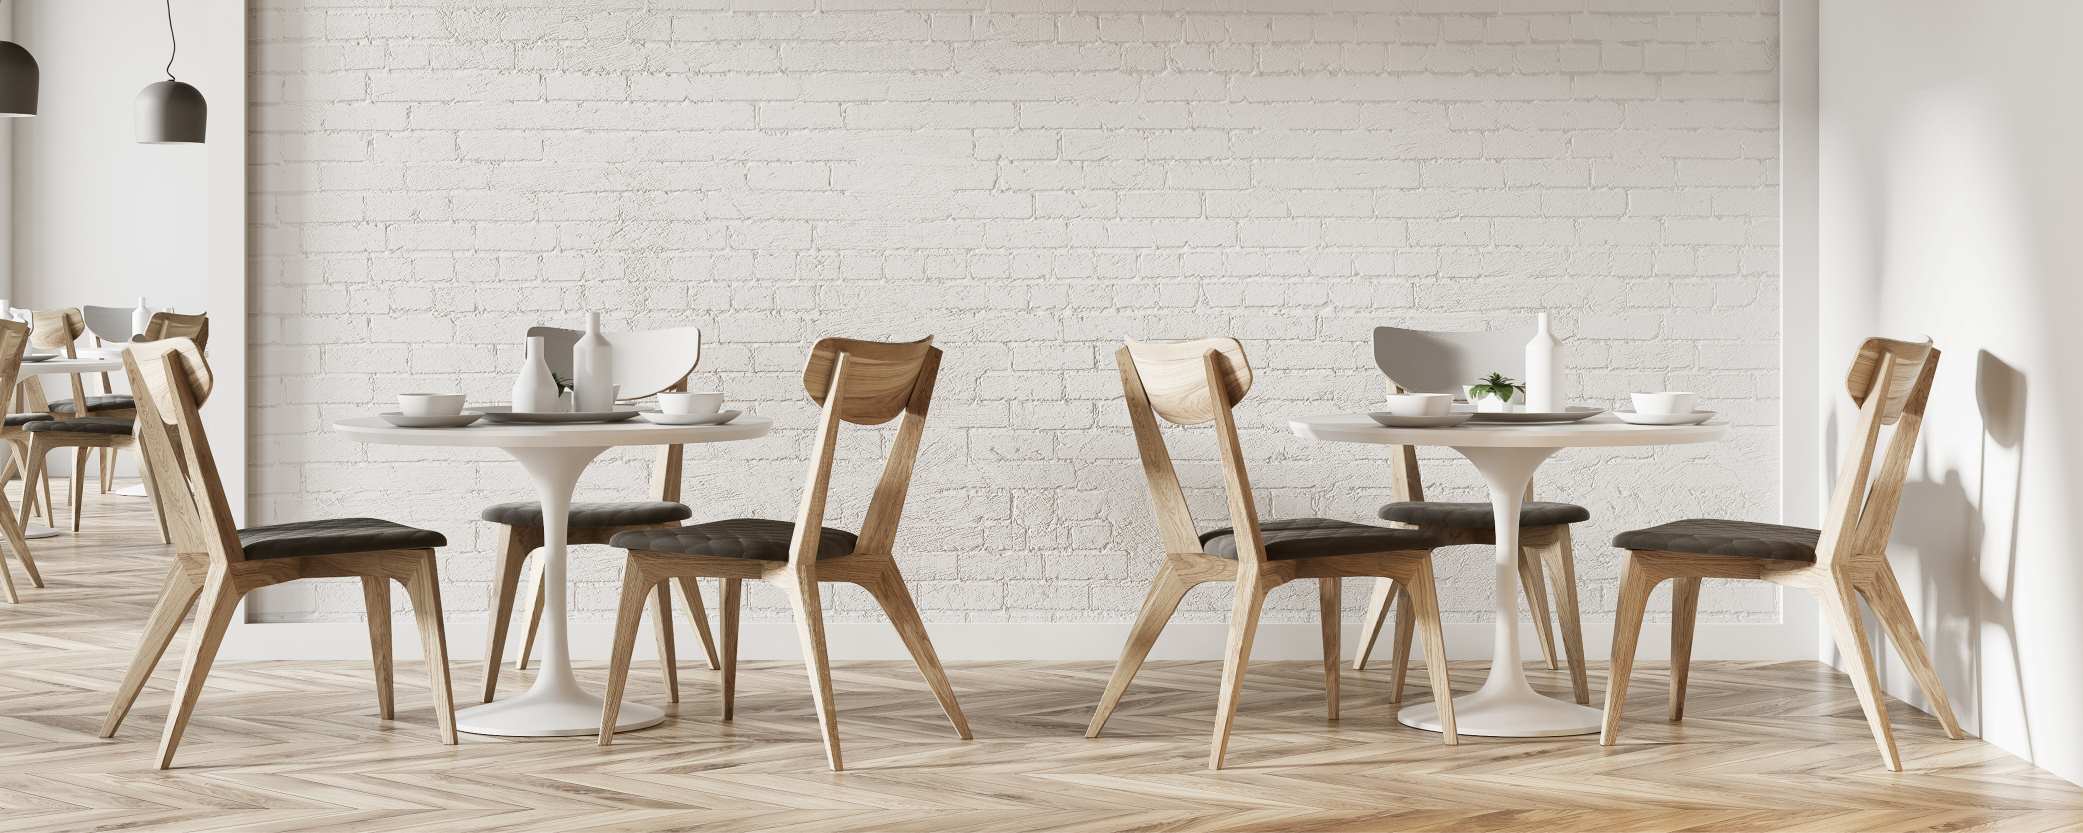 Featured image for “Restaurant Seating Design”